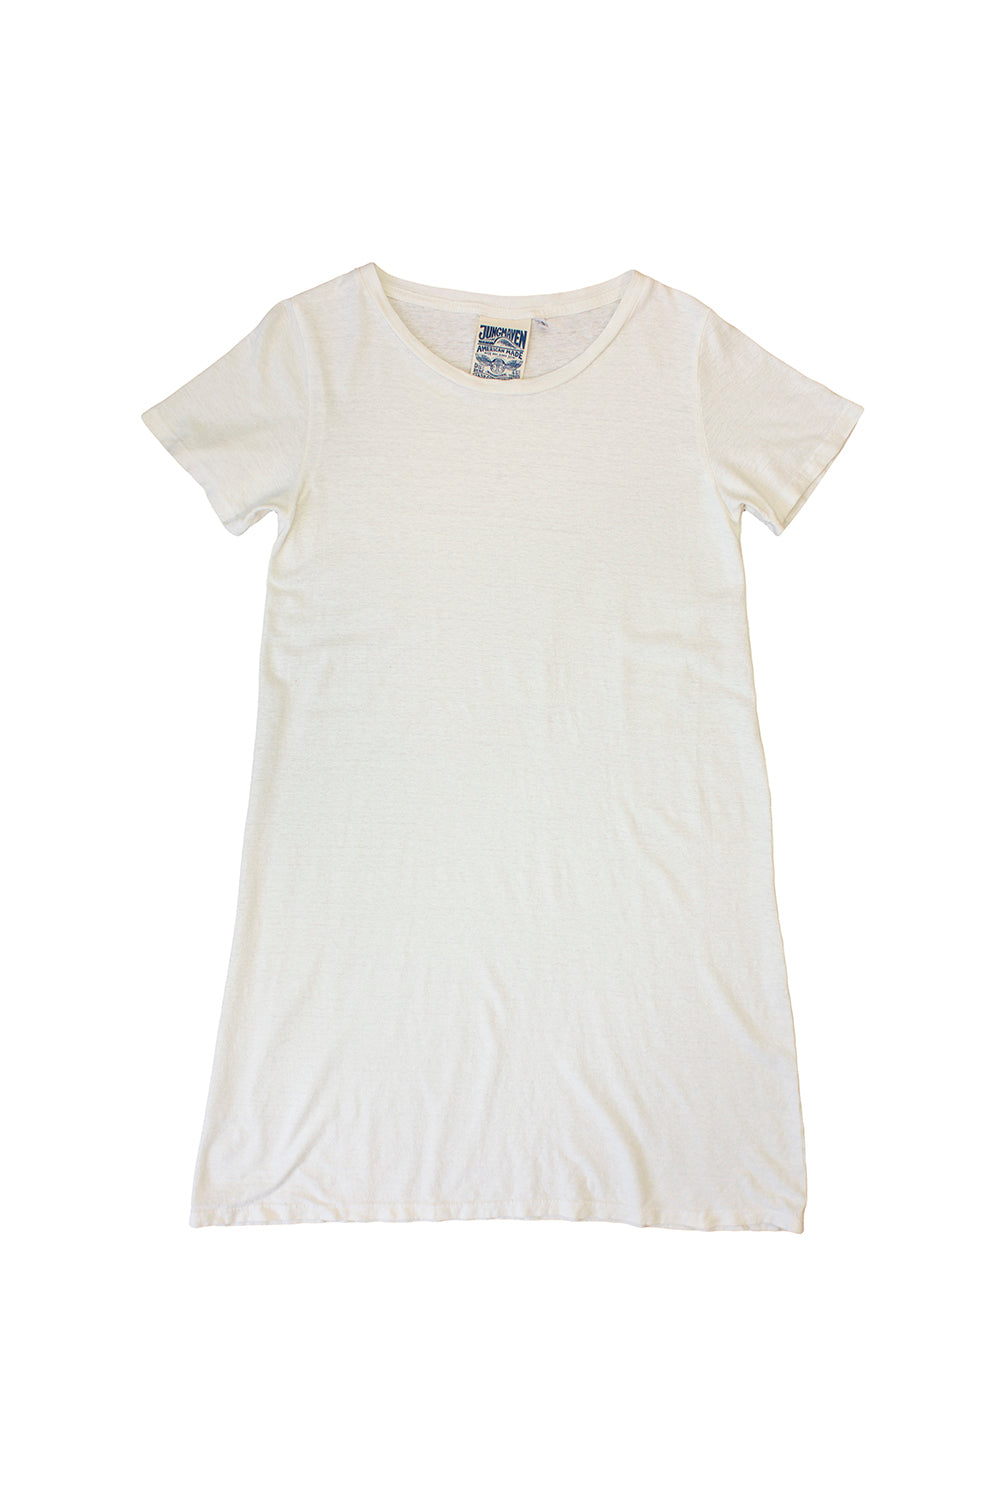 Rae Line Dress | Jungmaven Hemp Clothing & Accessories / Color: Washed White